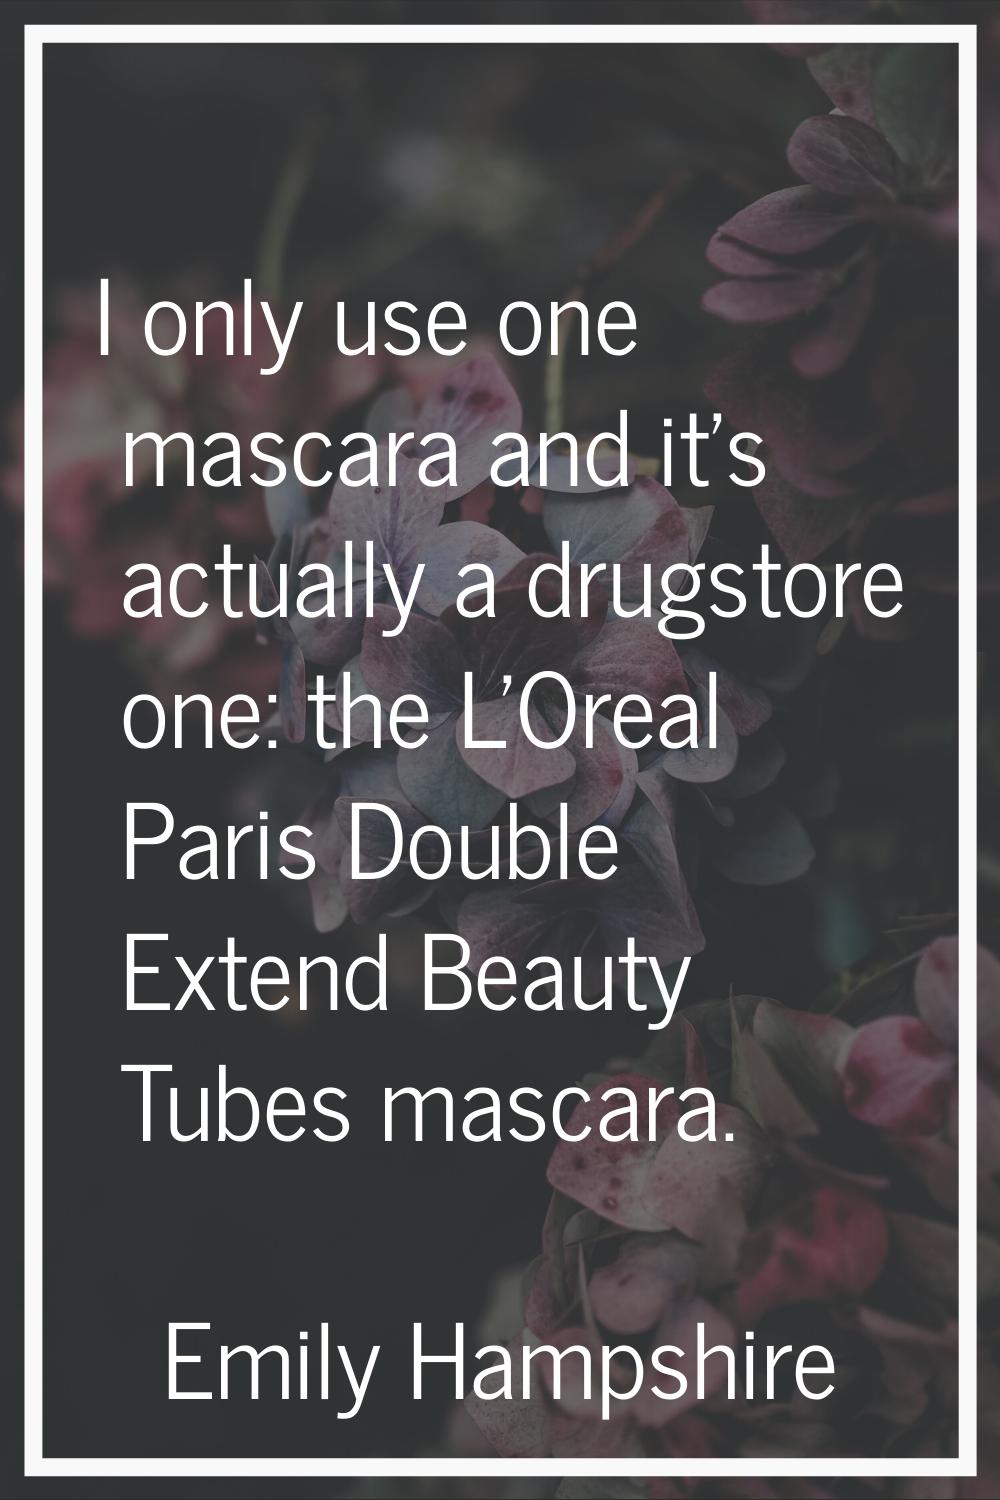 I only use one mascara and it's actually a drugstore one: the L'Oreal Paris Double Extend Beauty Tu